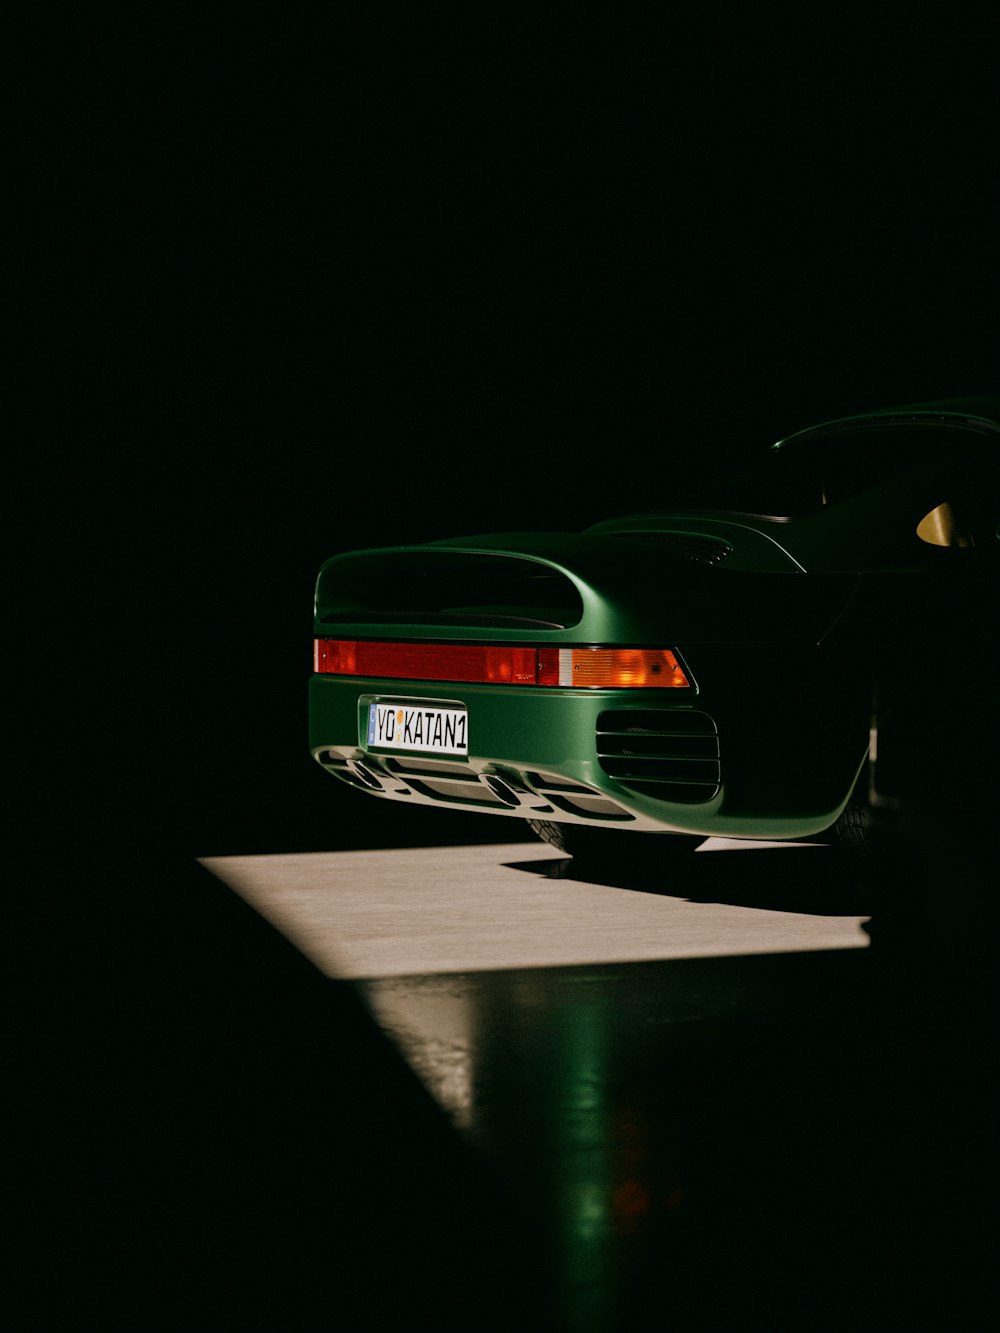 a green sports car parked in the dark